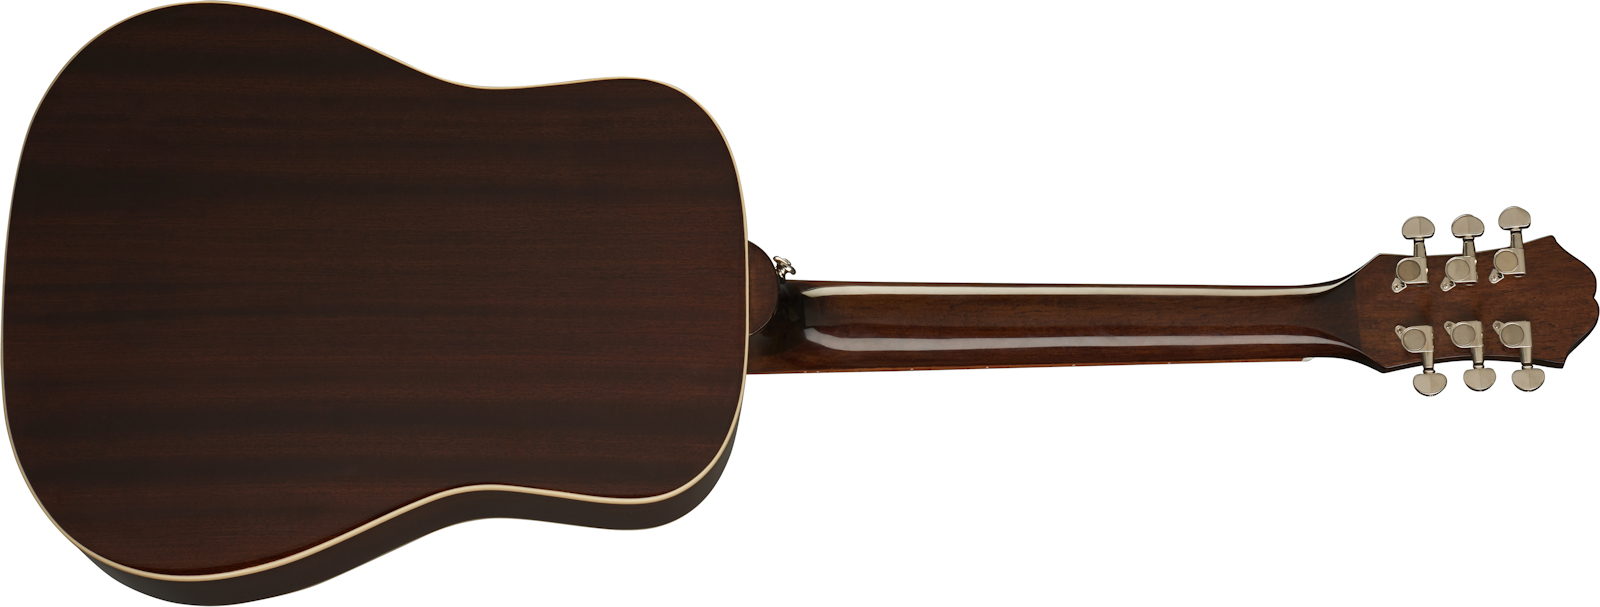 Epiphone Lil Tex Travel Outfit Epicea Sapele Gra +housse - Faded Cherry - Travel acoustic guitar - Variation 1